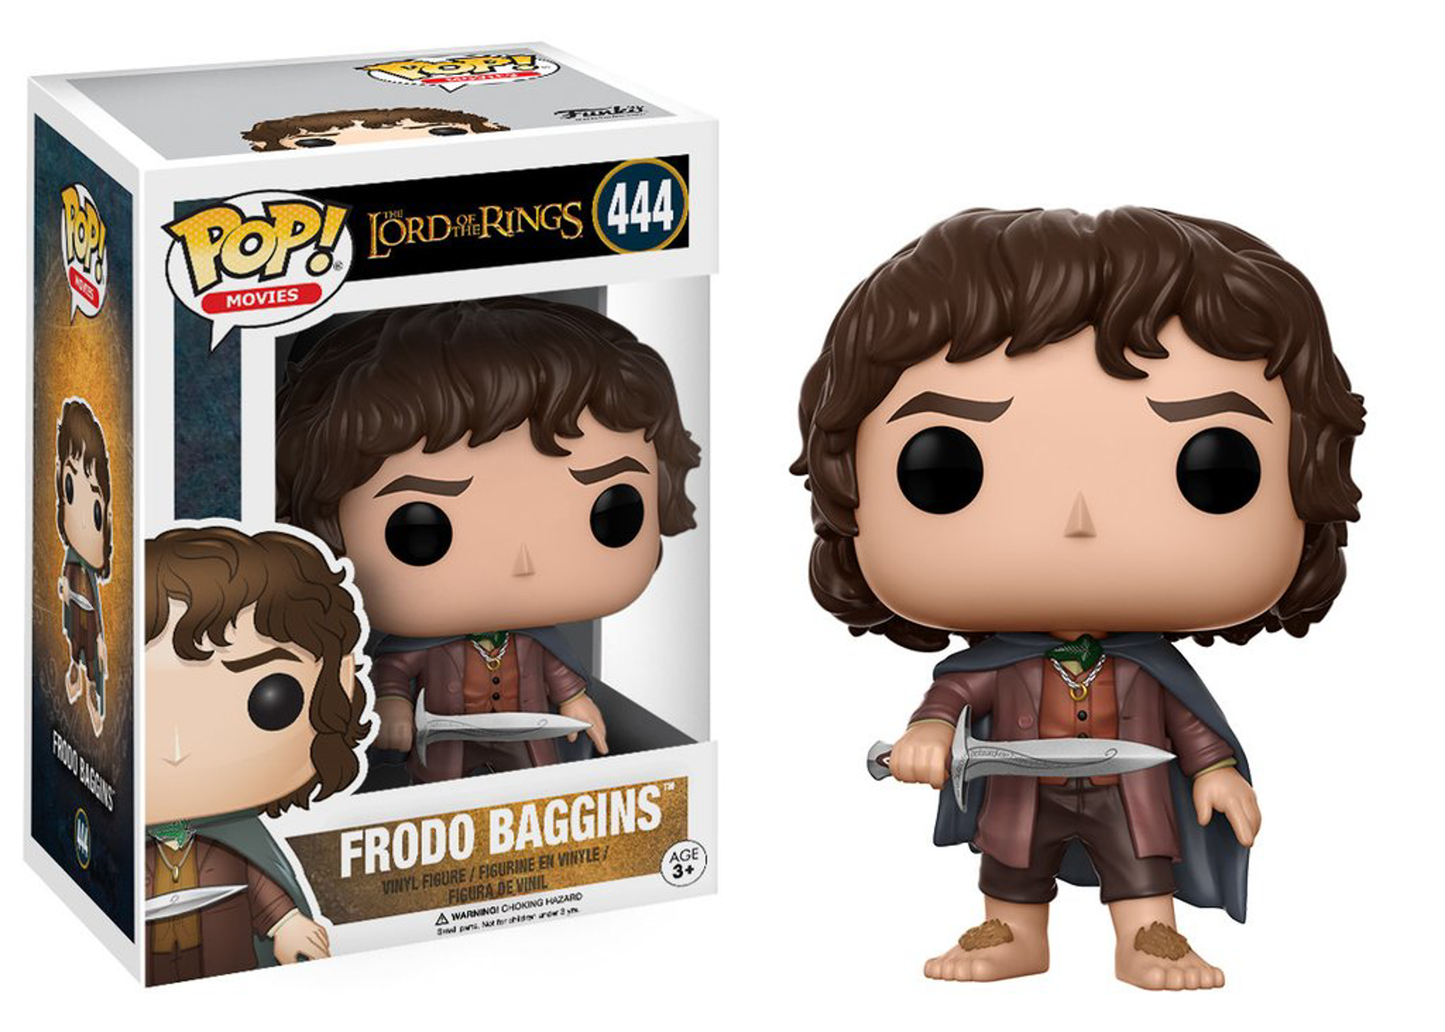 Funko pop! Films The Lord of the Rings Frodo Baggins PRECO